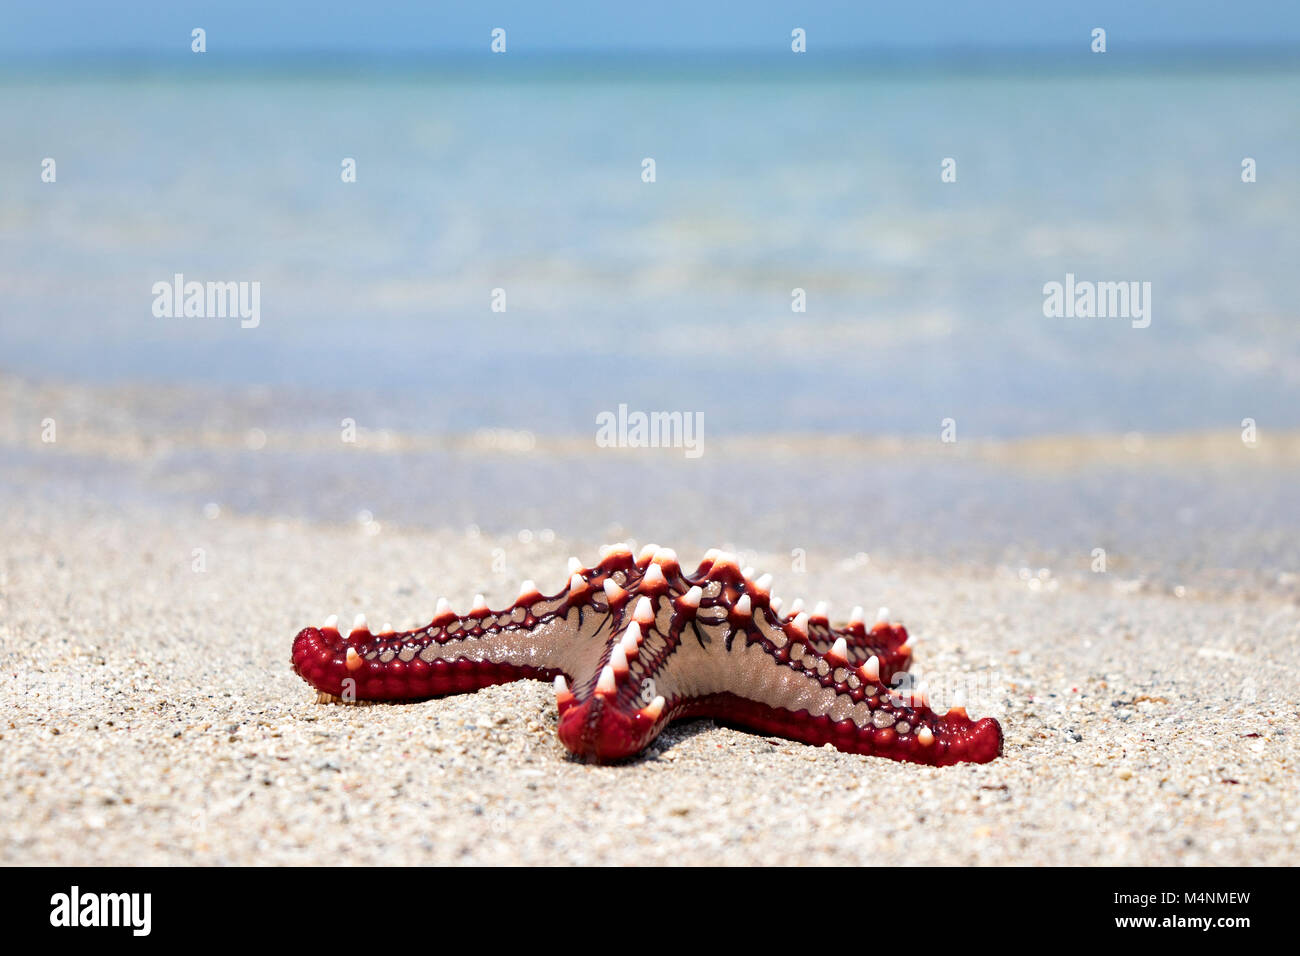 Colorful African red knob sea star or starfish on beach with ocean in background Stock Photo